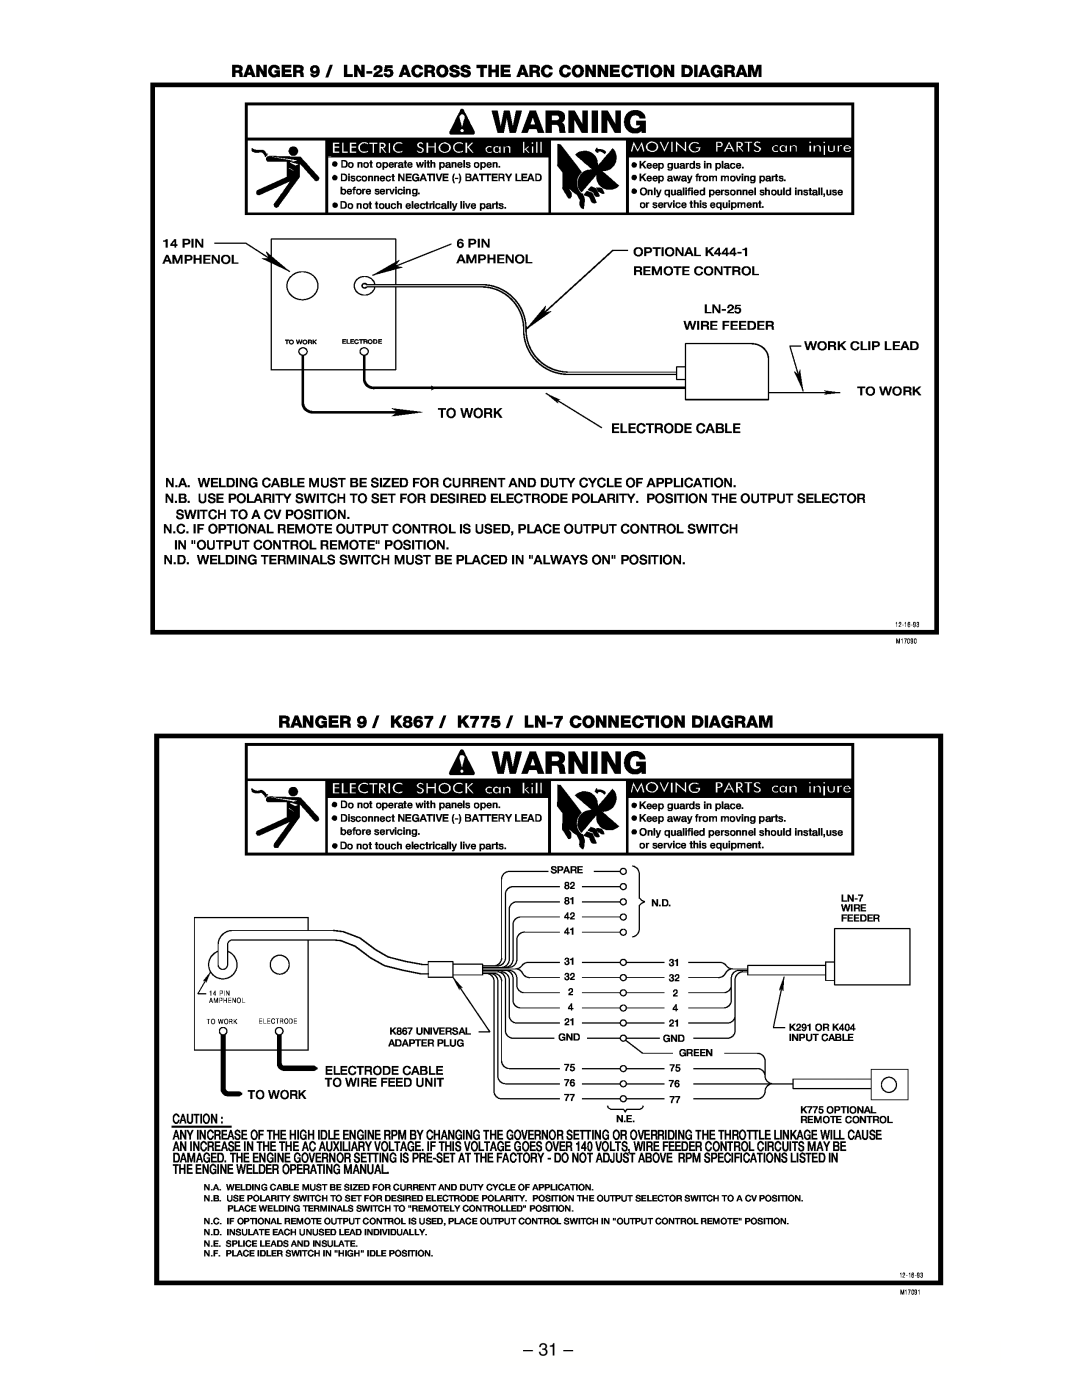 Lincoln Electric IM511-D manual RANGER 9 / LN-25 ACROSS THE ARC CONNECTION DIAGRAM 